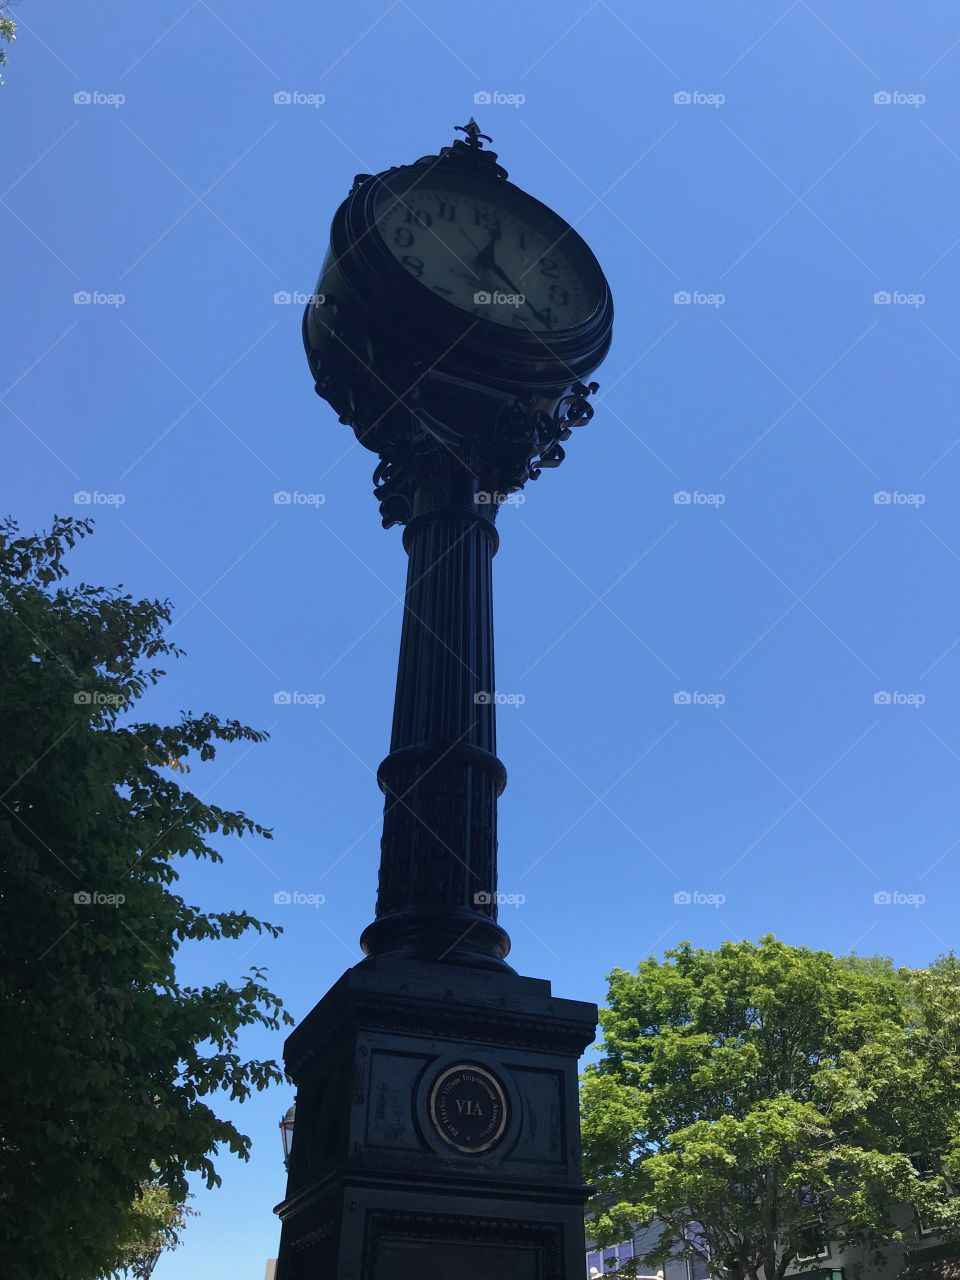 The clock by the village green in downtown Bar Harbor, Maine